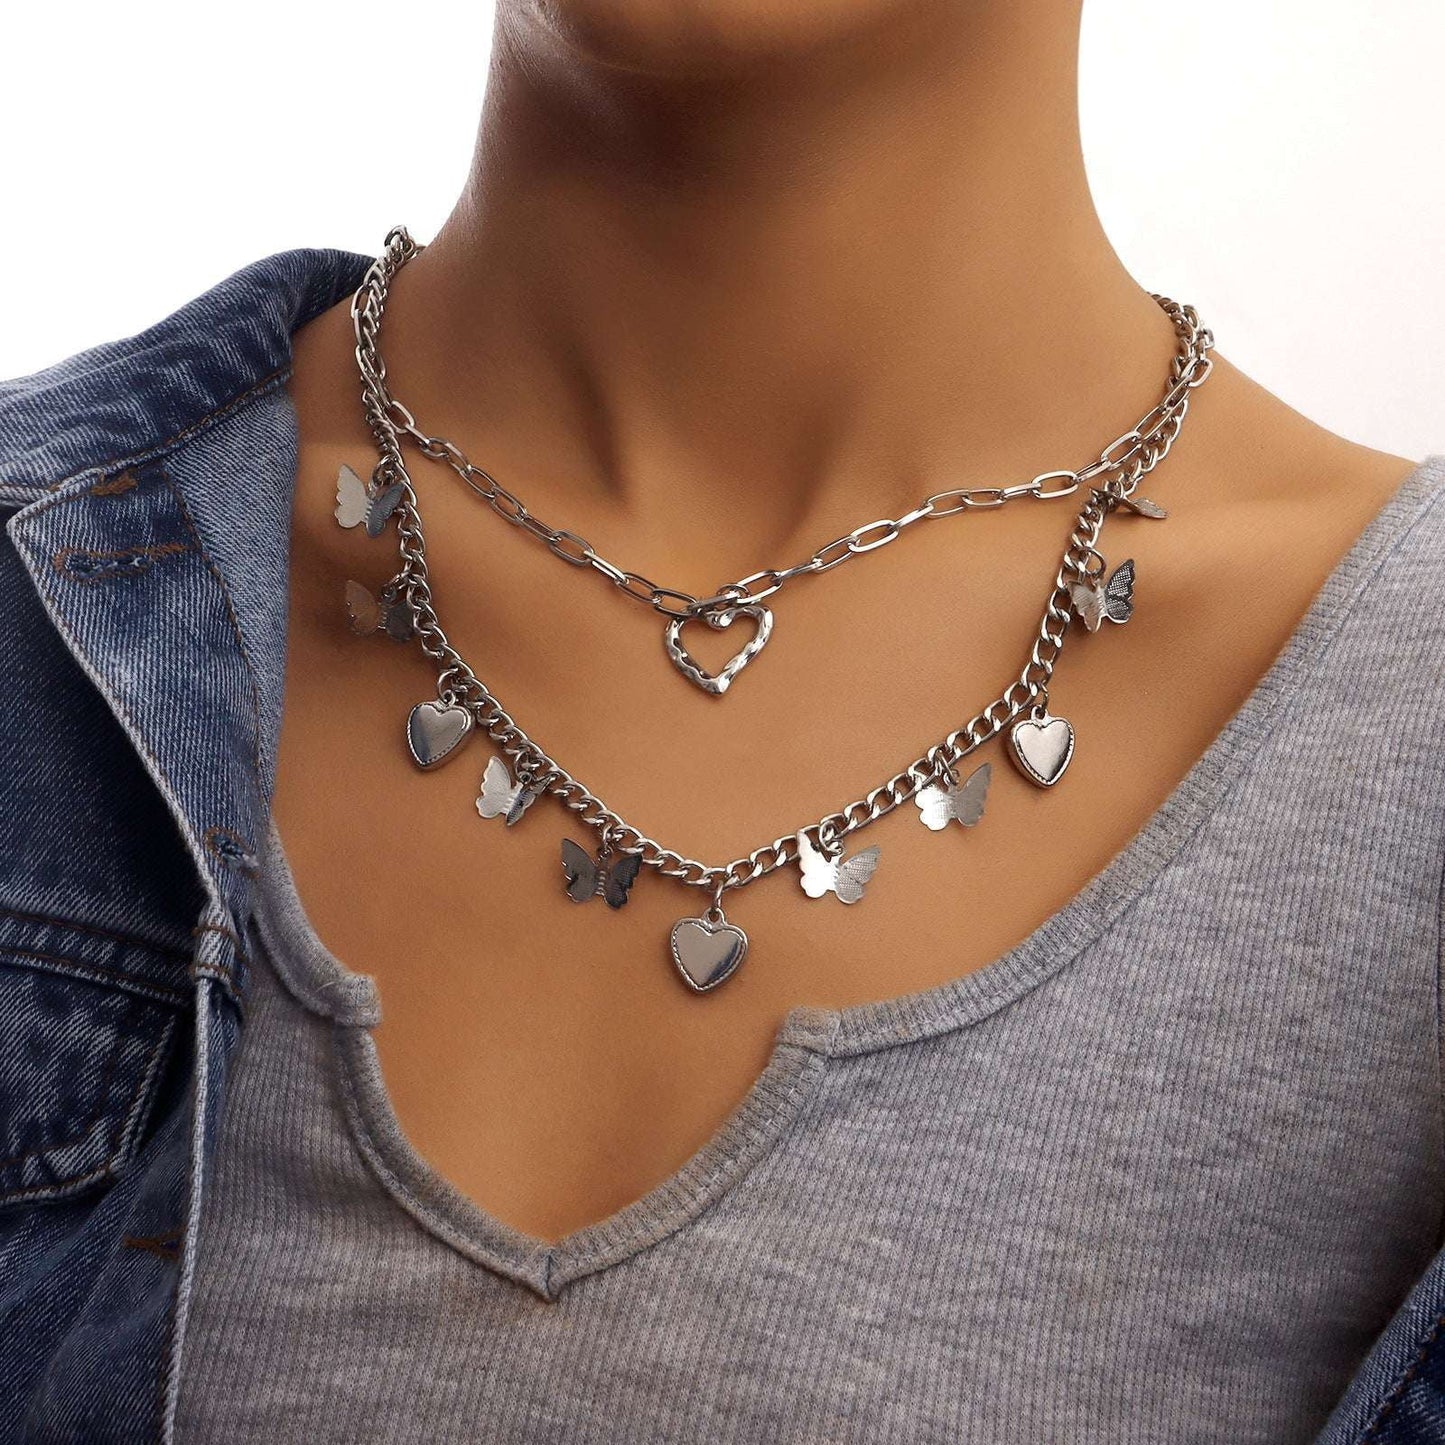 Alloy Love Necklace, Chic Fashion Jewelry, Punk Butterfly Pendant - available at Sparq Mart